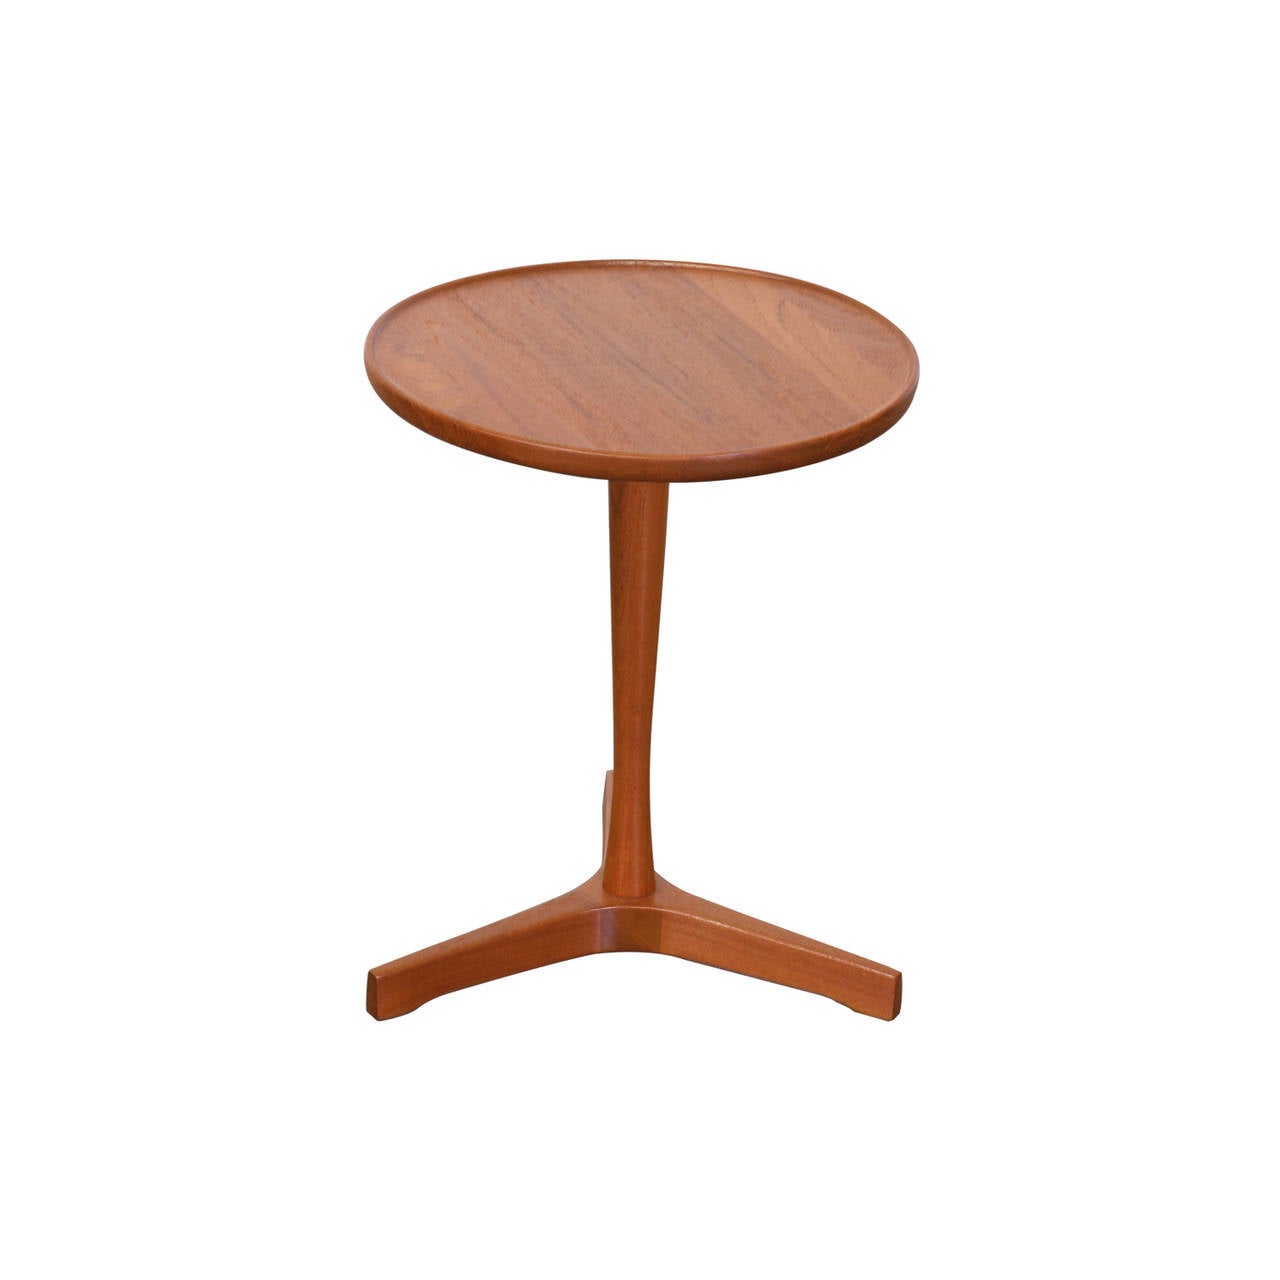 Designer: Artex
Manufacturer: Artex
Period/Style: Danish Modern
Country: Denmark
Date: 1960s

Dimensions: 21.75″H x 14.5″D
Materials: Teak
Condition: Excellent – Newly Refinished 
Number of Items: 1
ID Number: